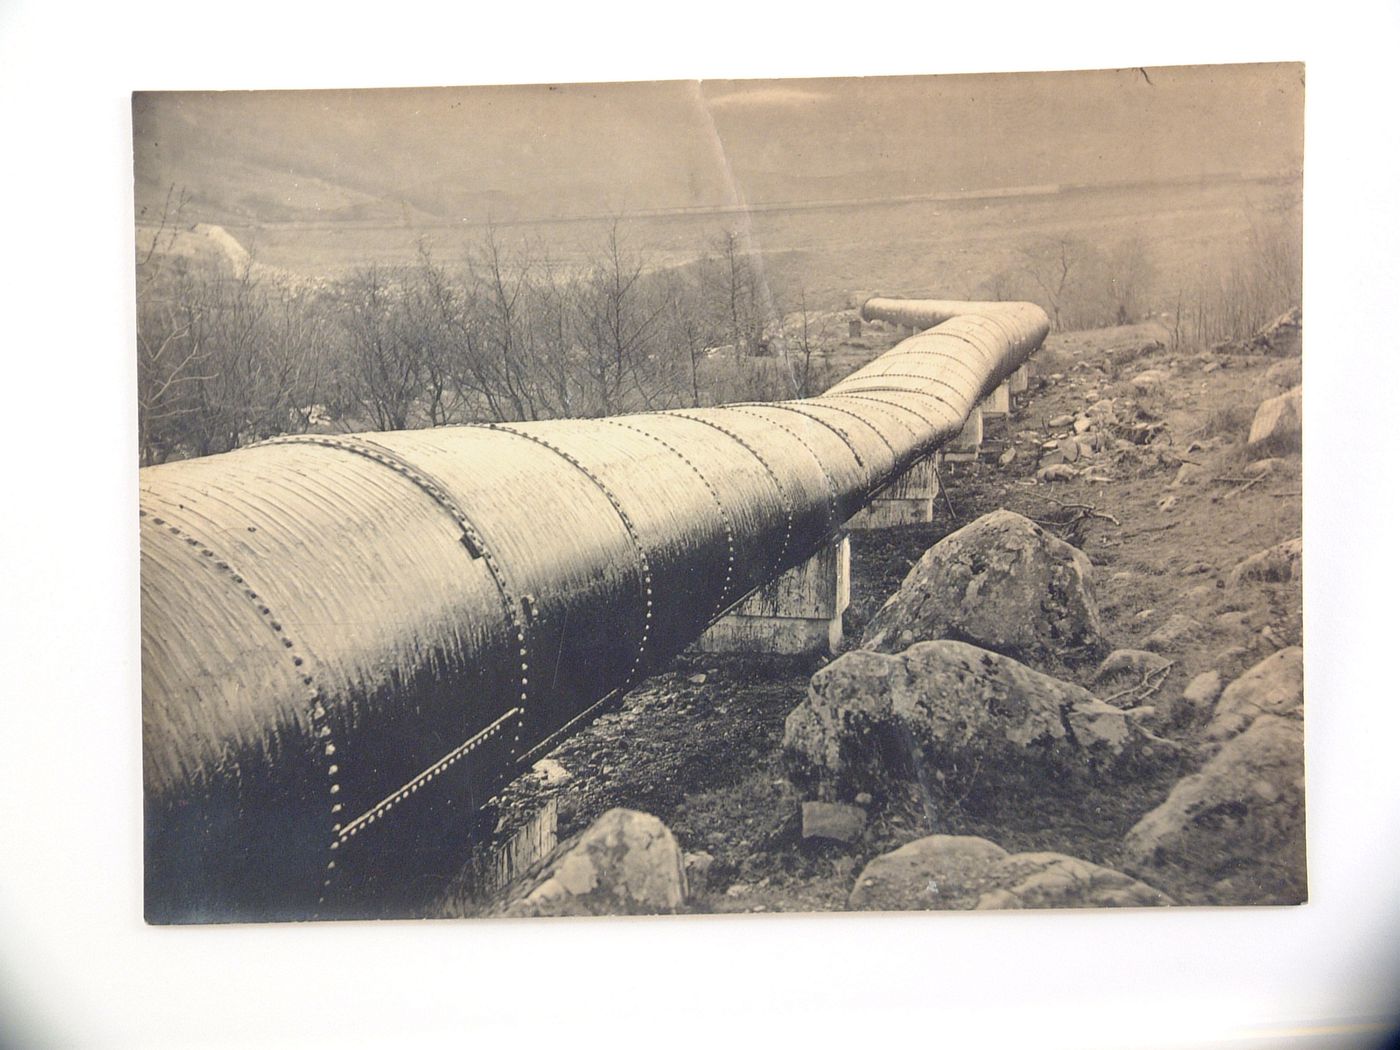 View of large riveted pipeline, unknown location